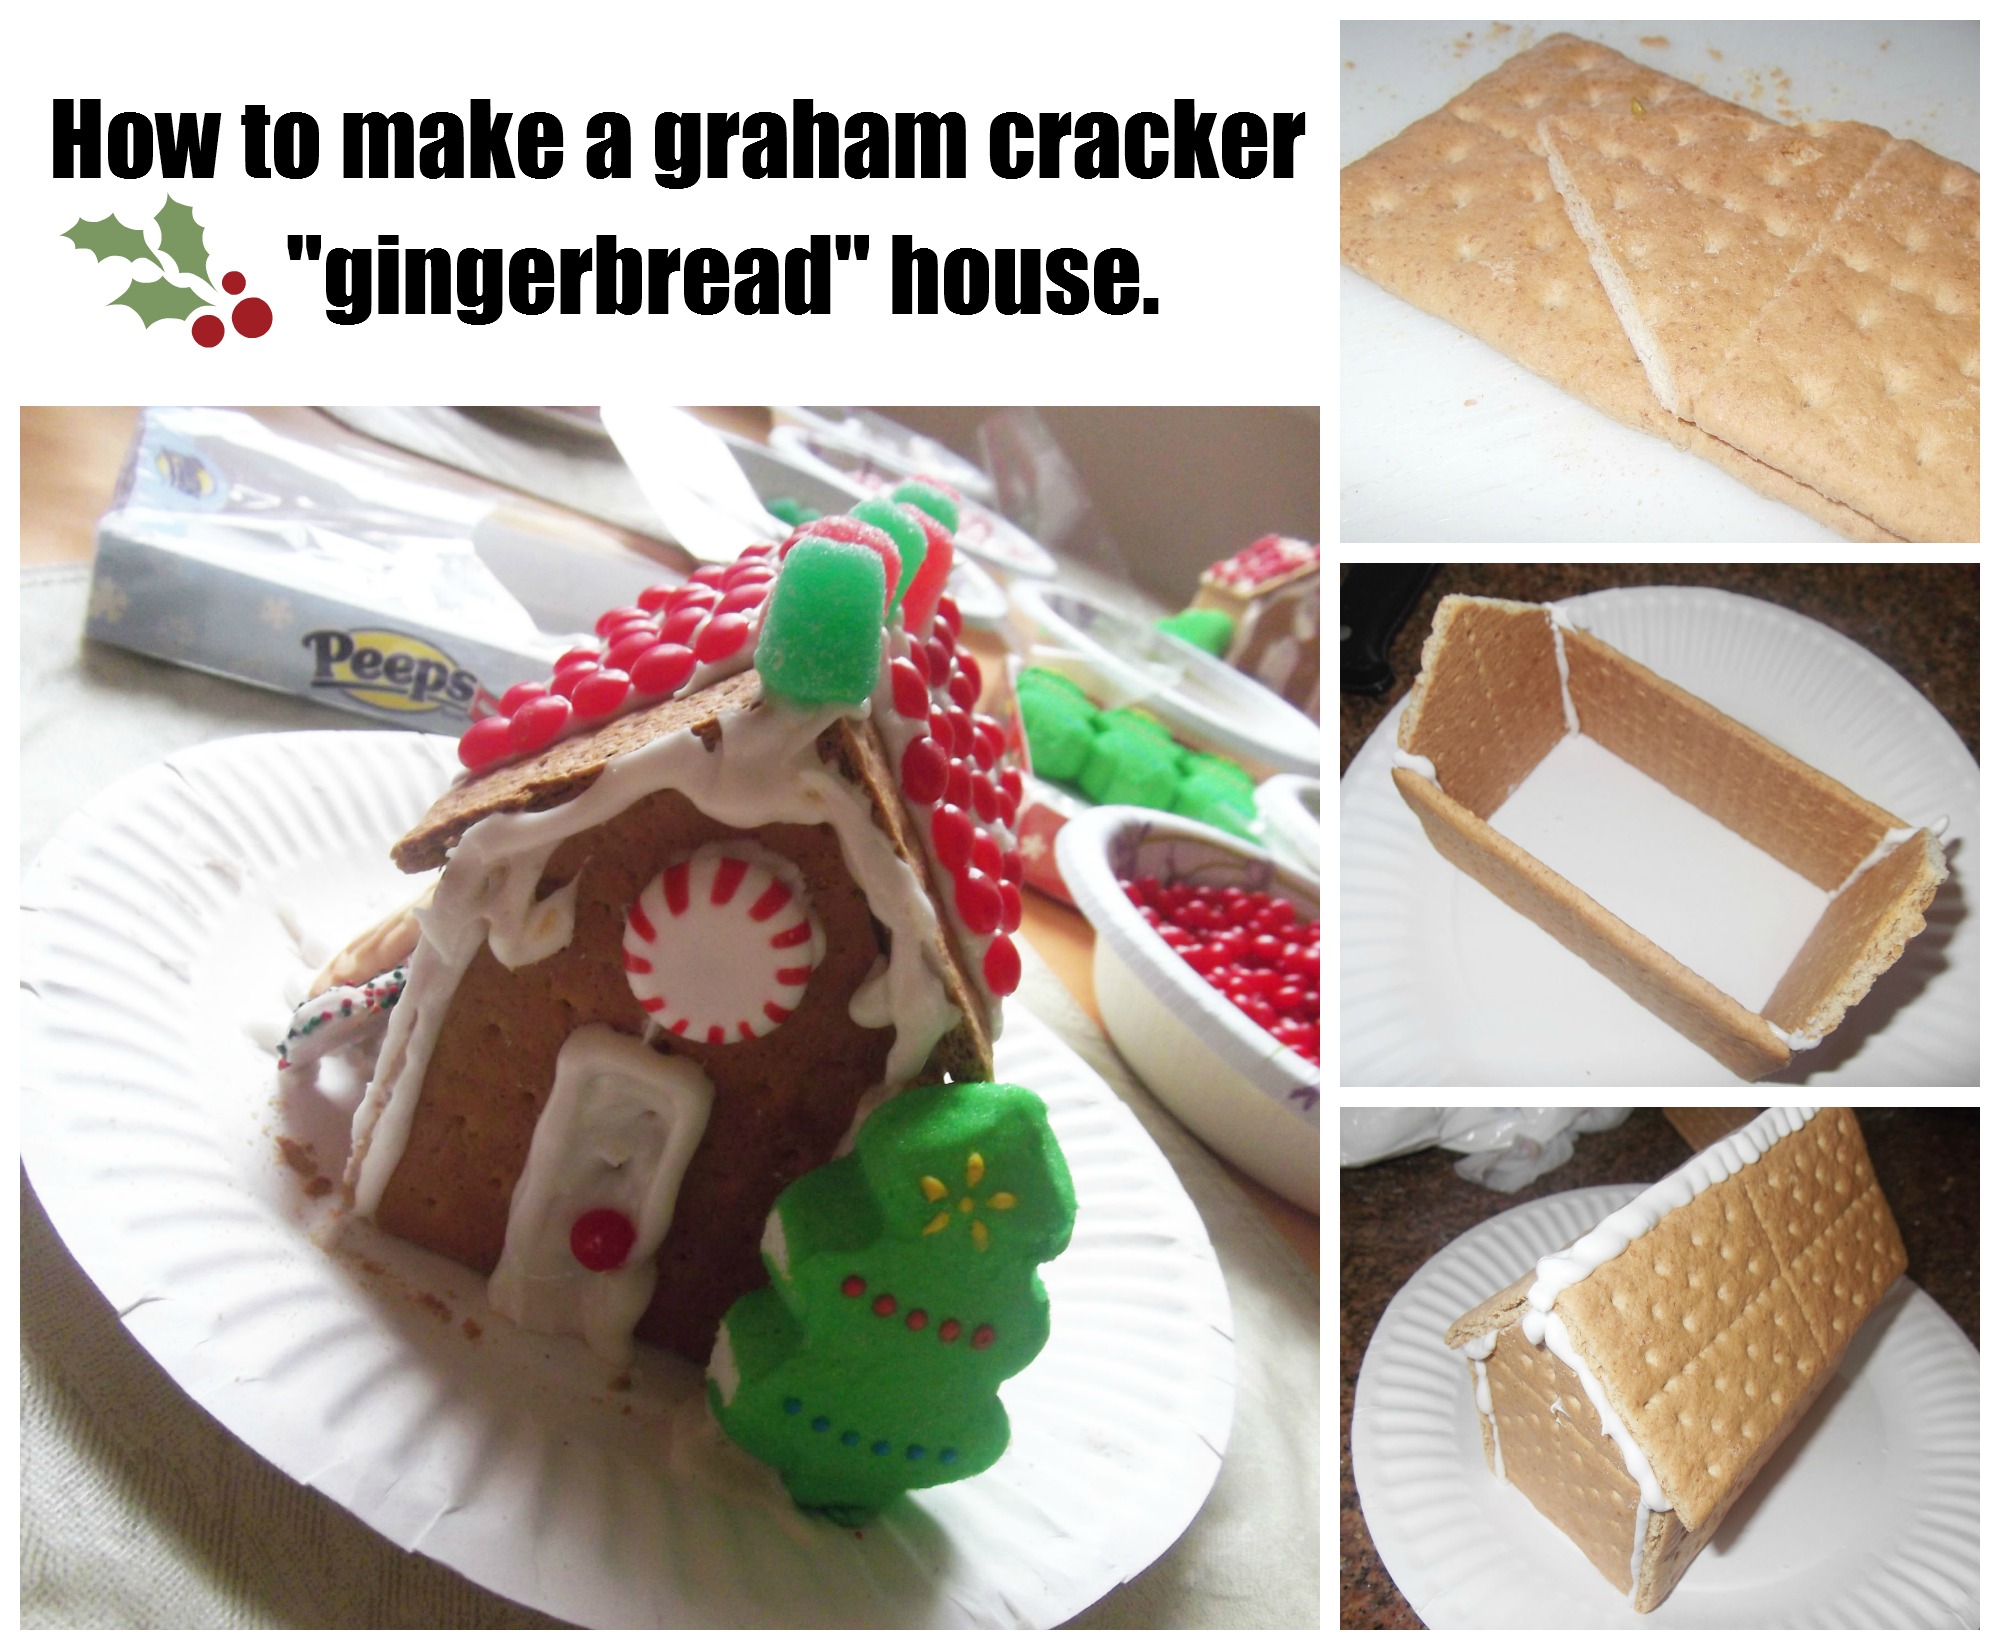 How to Make a Graham Cracker Gingerbread House